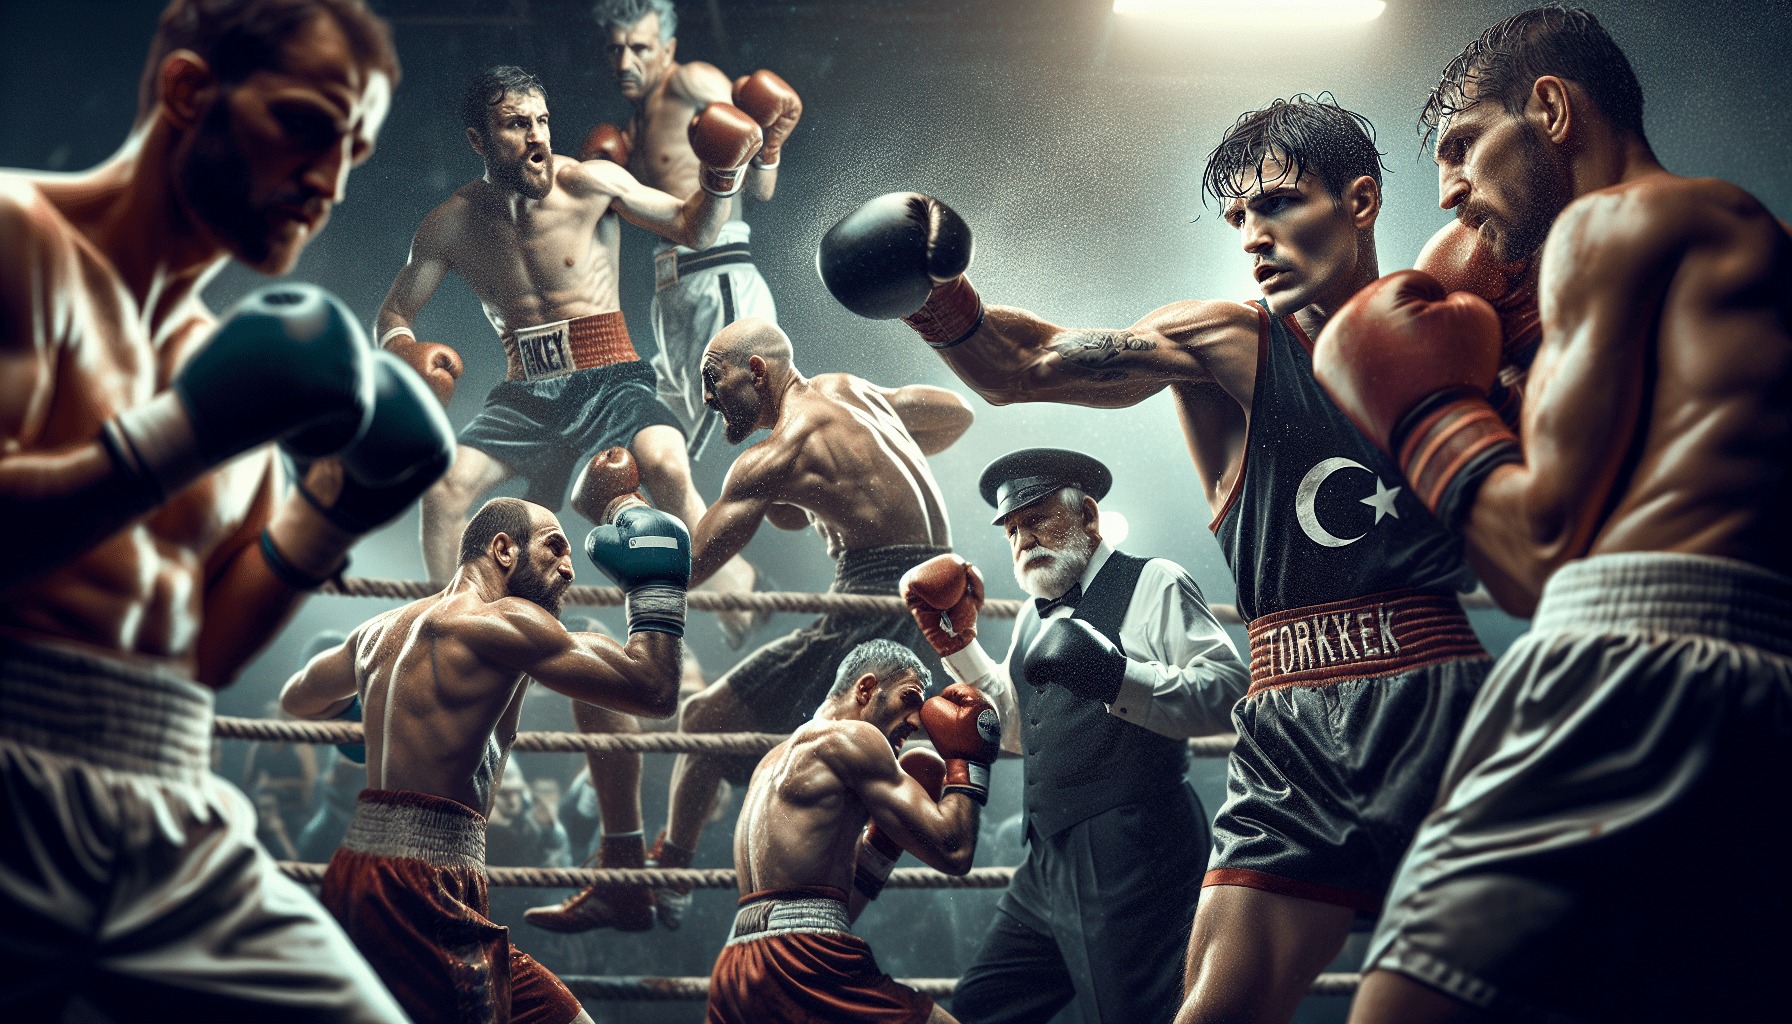 Dynamic digital artwork depicting multiple boxers engaged in intense matches within a boxing ring, underscored by atmospheric lighting and a gritty aesthetic.